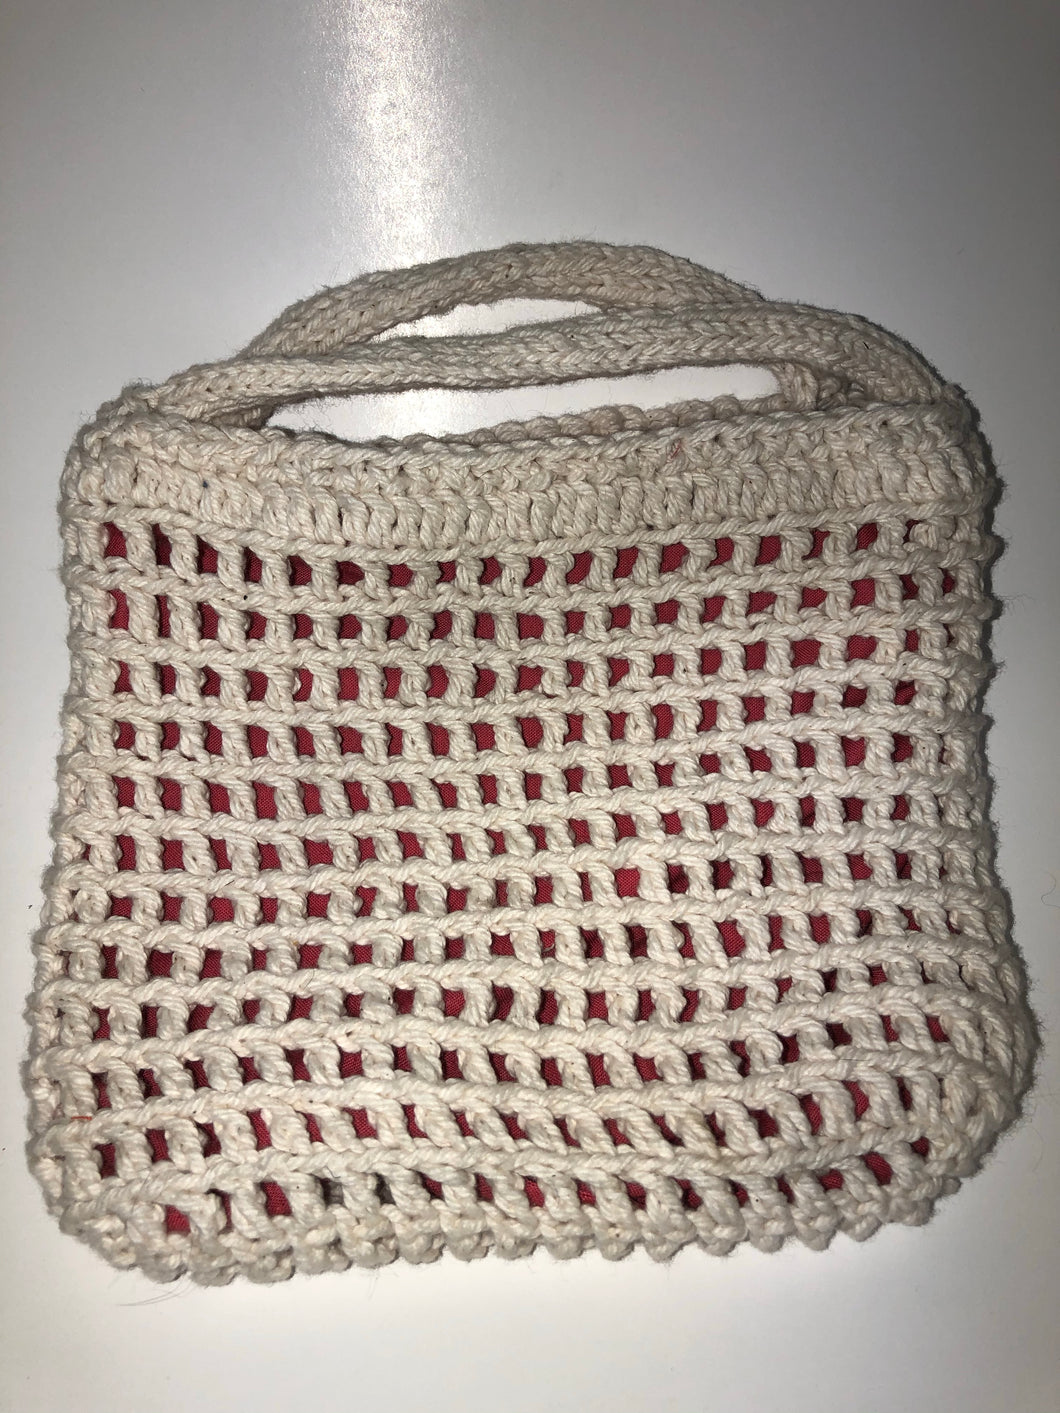 White knit bag with pink lining